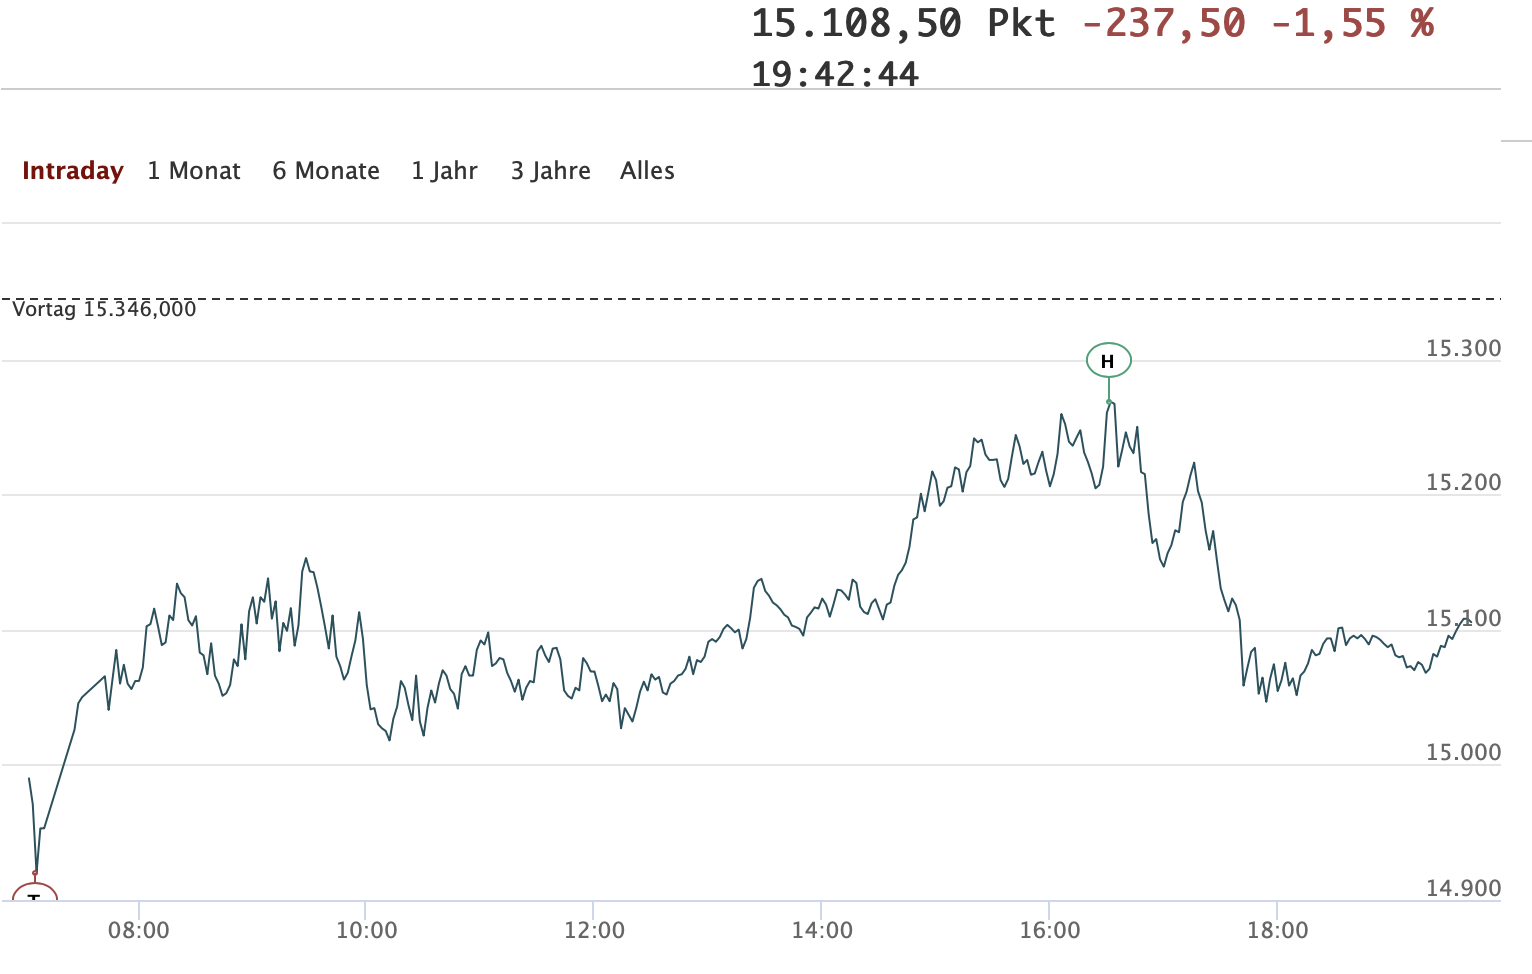 20211130-dax-intraday.png